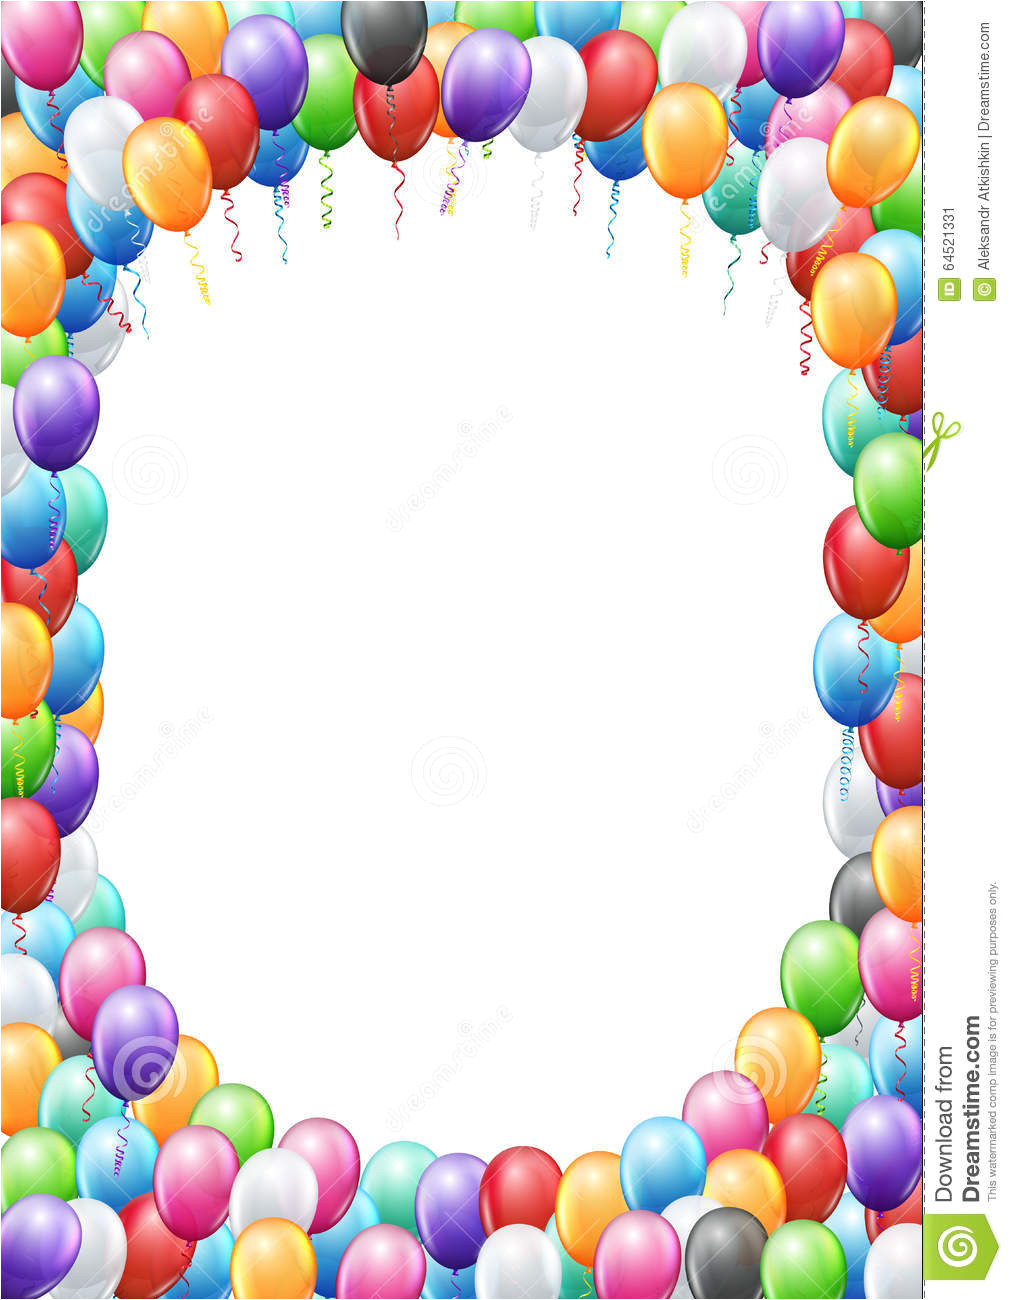 stock illustration balloons header template colored frame proportions page birthday party invitation vector background image64521331